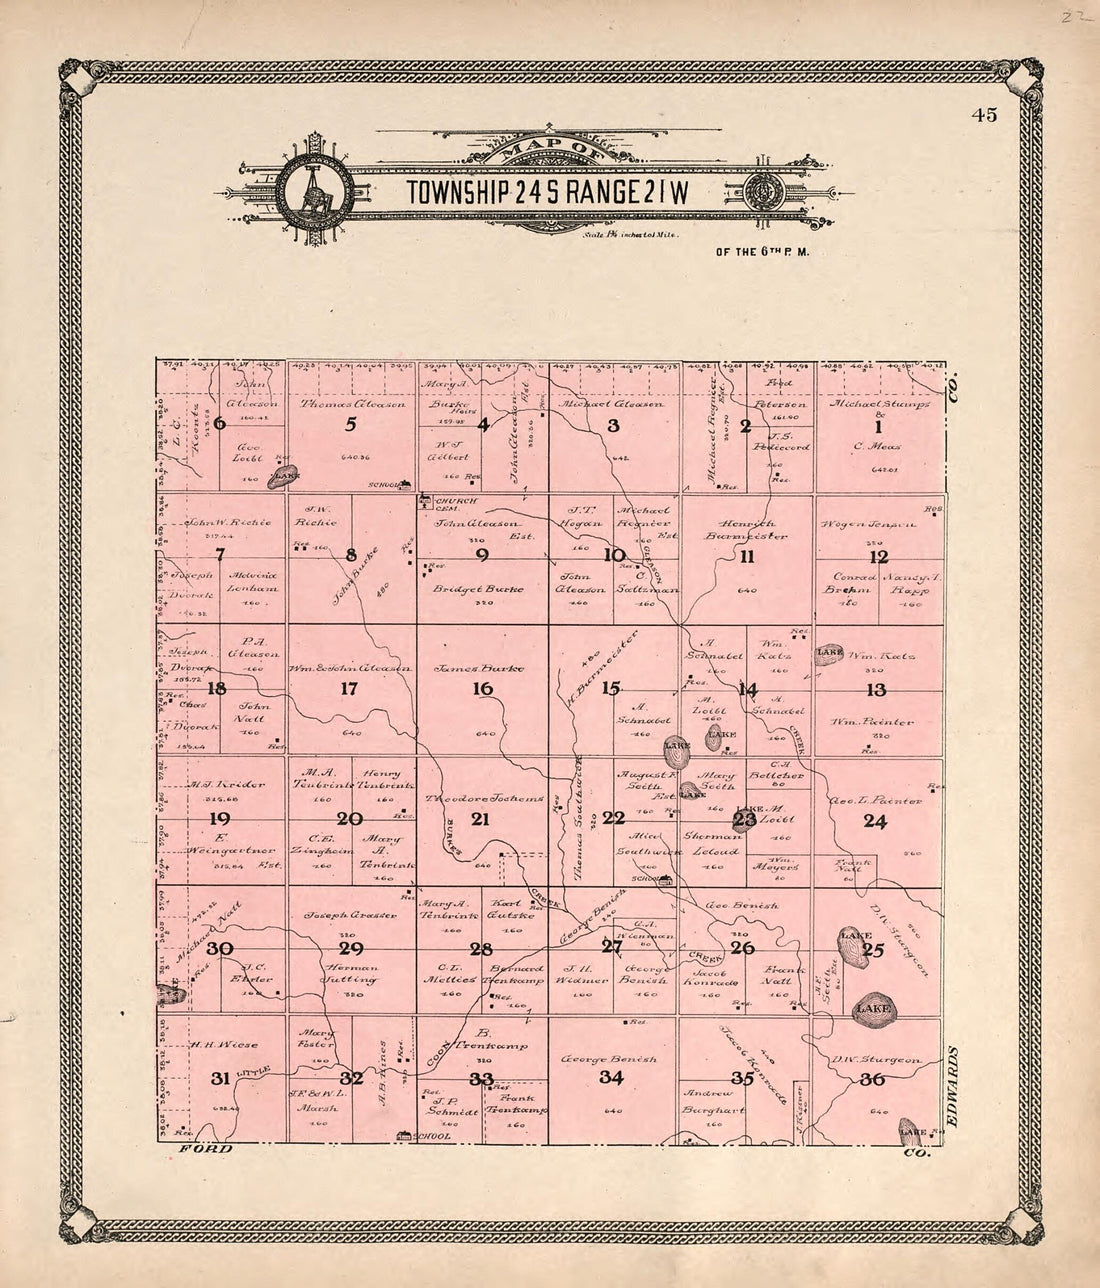 This old map of Map of Township 24 S Range 21 W from Standard Atlas of Hodgeman County, Kansas from 1907 was created by  Geo. A. Ogle &amp; Co in 1907